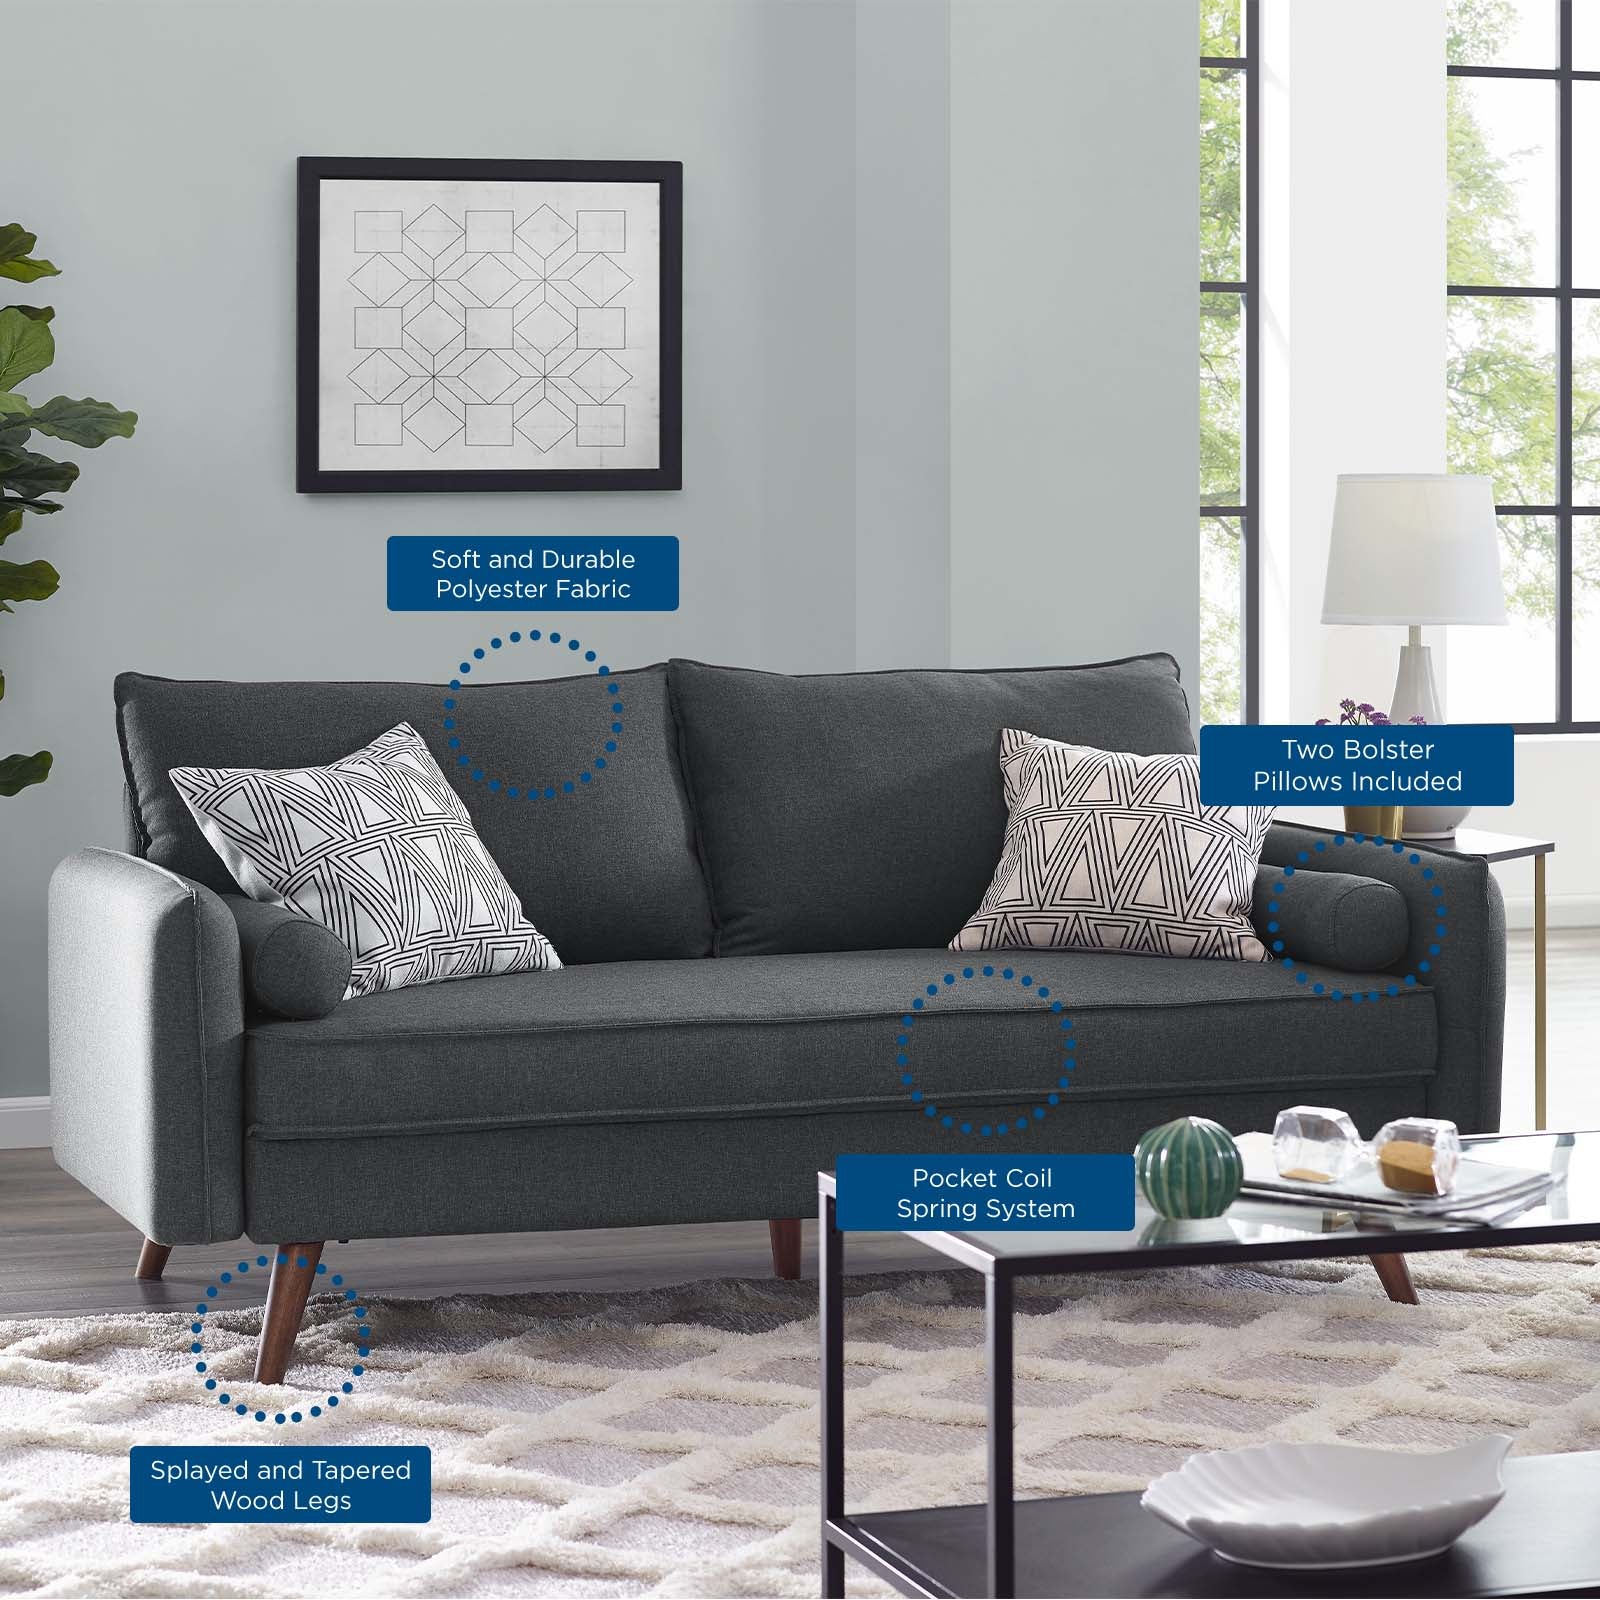 Modway Sofas & Couches - Revive Upholstered Fabric Sofa Gray